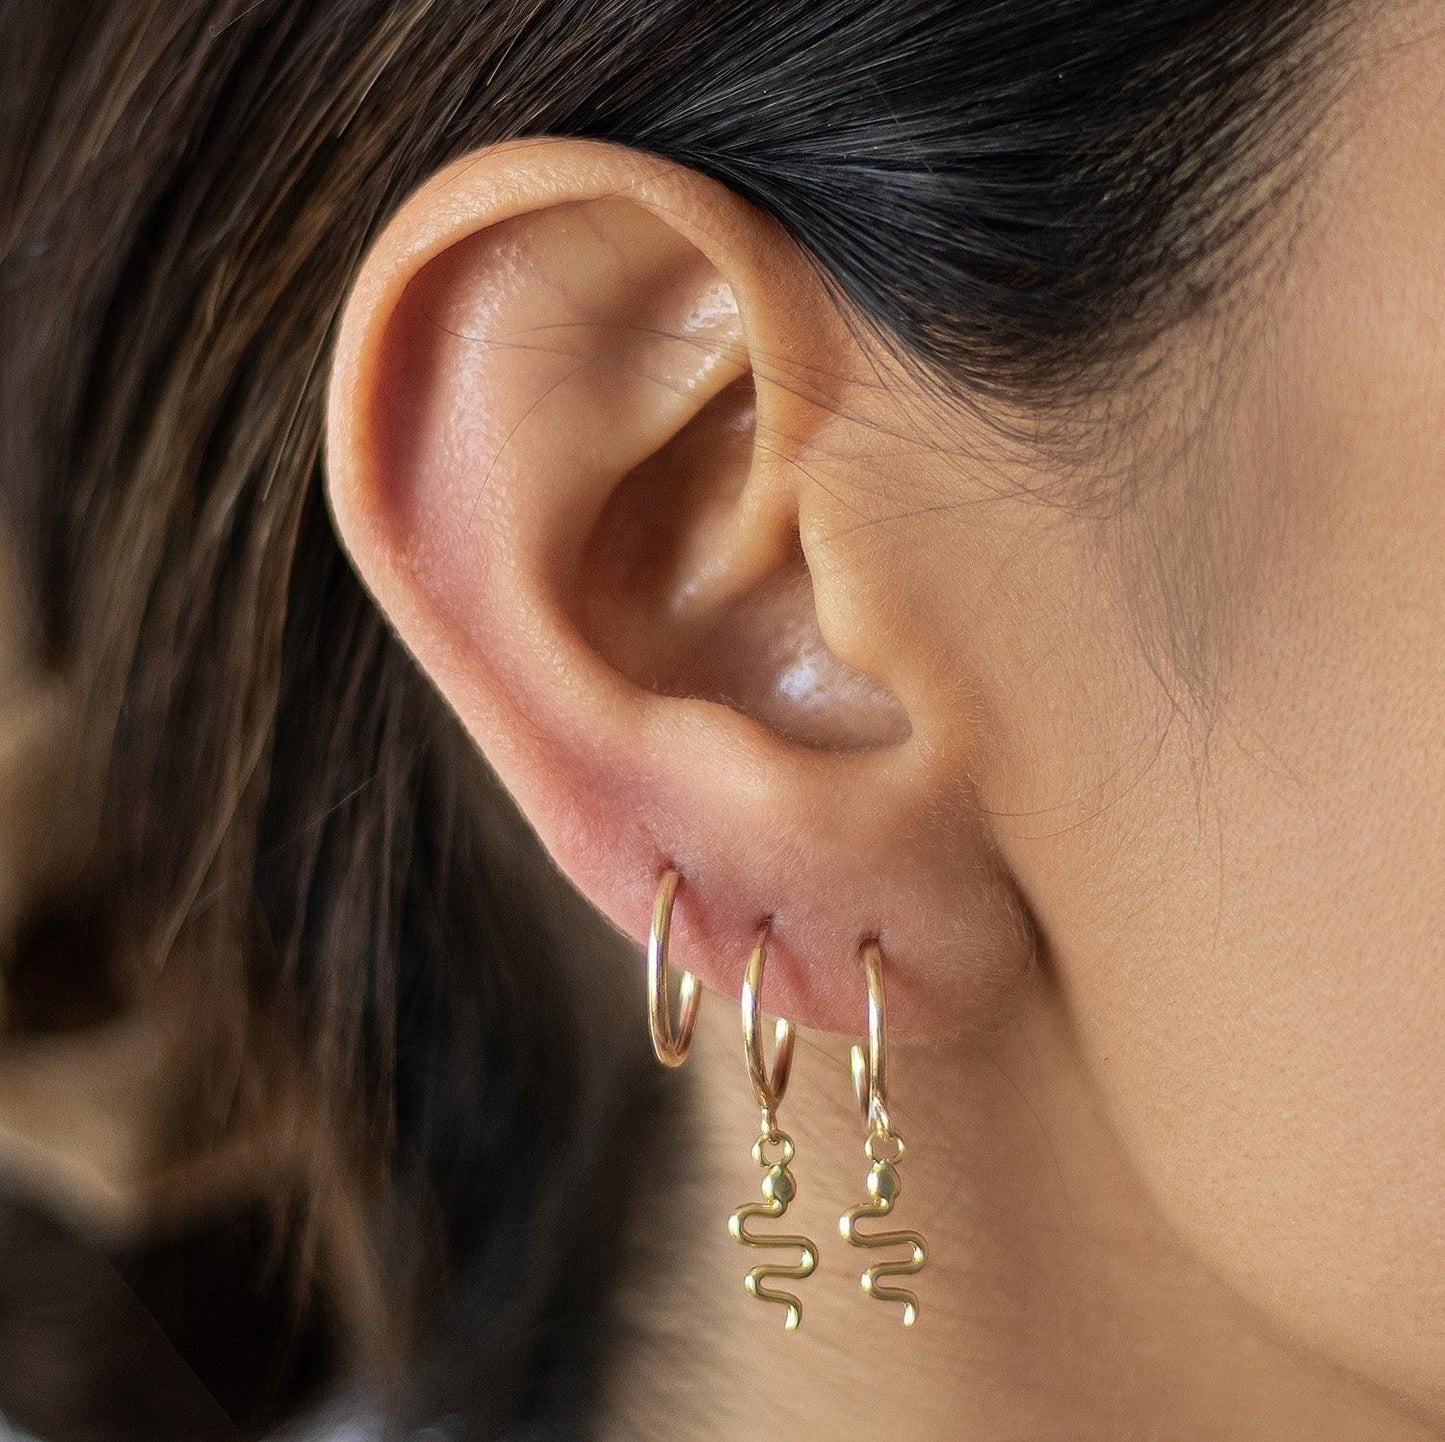 Load image into Gallery viewer, The Snake Earrings are trendy and unique. 10K Gold Hoop Earrings with a Gold Snake Charm in the center, these snake earrings are sure to make you stand out in a crowd. Ultra stylish Huggie hoop earrings that will look great on anyone’s ears!
